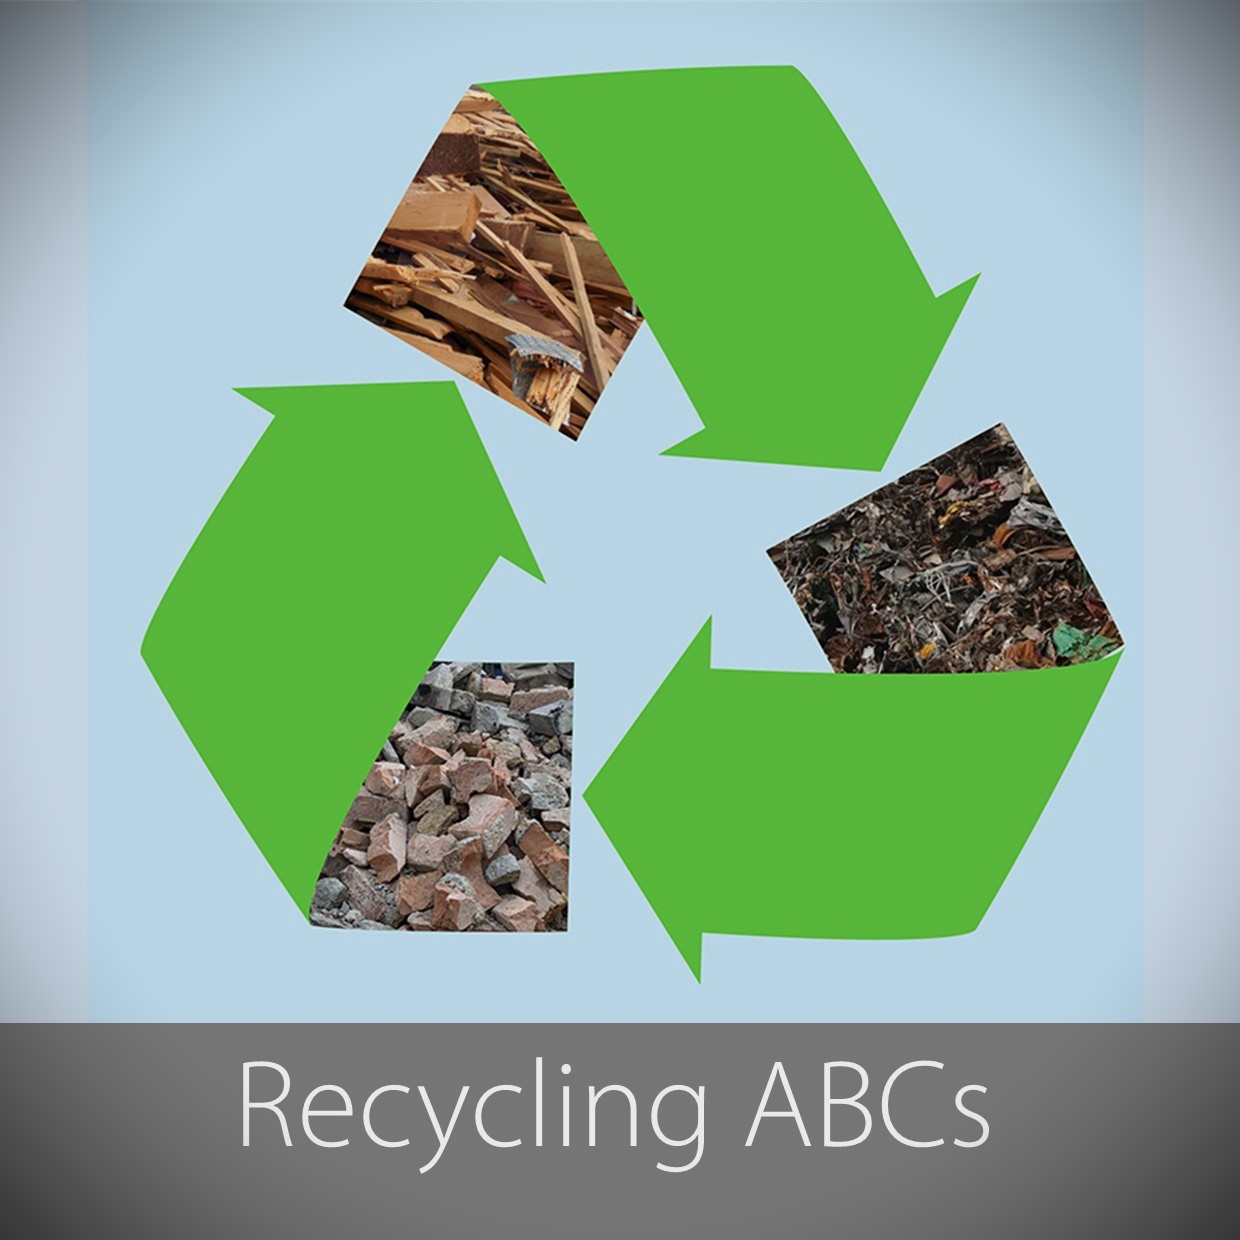 Recycling ABCs